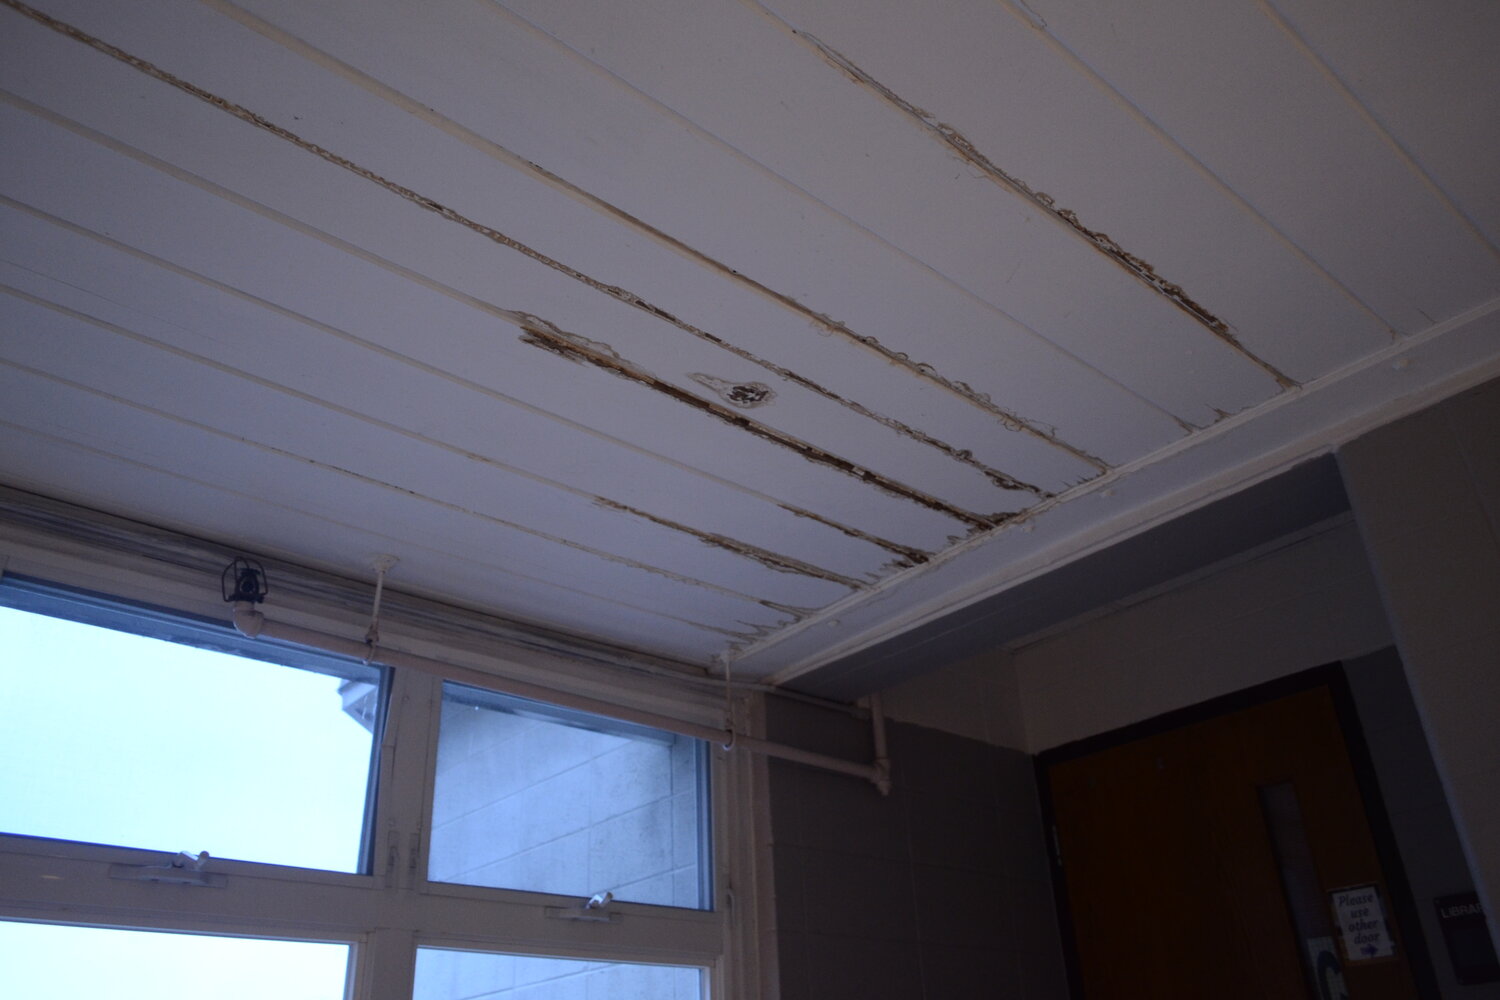 Water damage can be seen throughout the school along the ceiling, like this spot next to a window on the top floor.